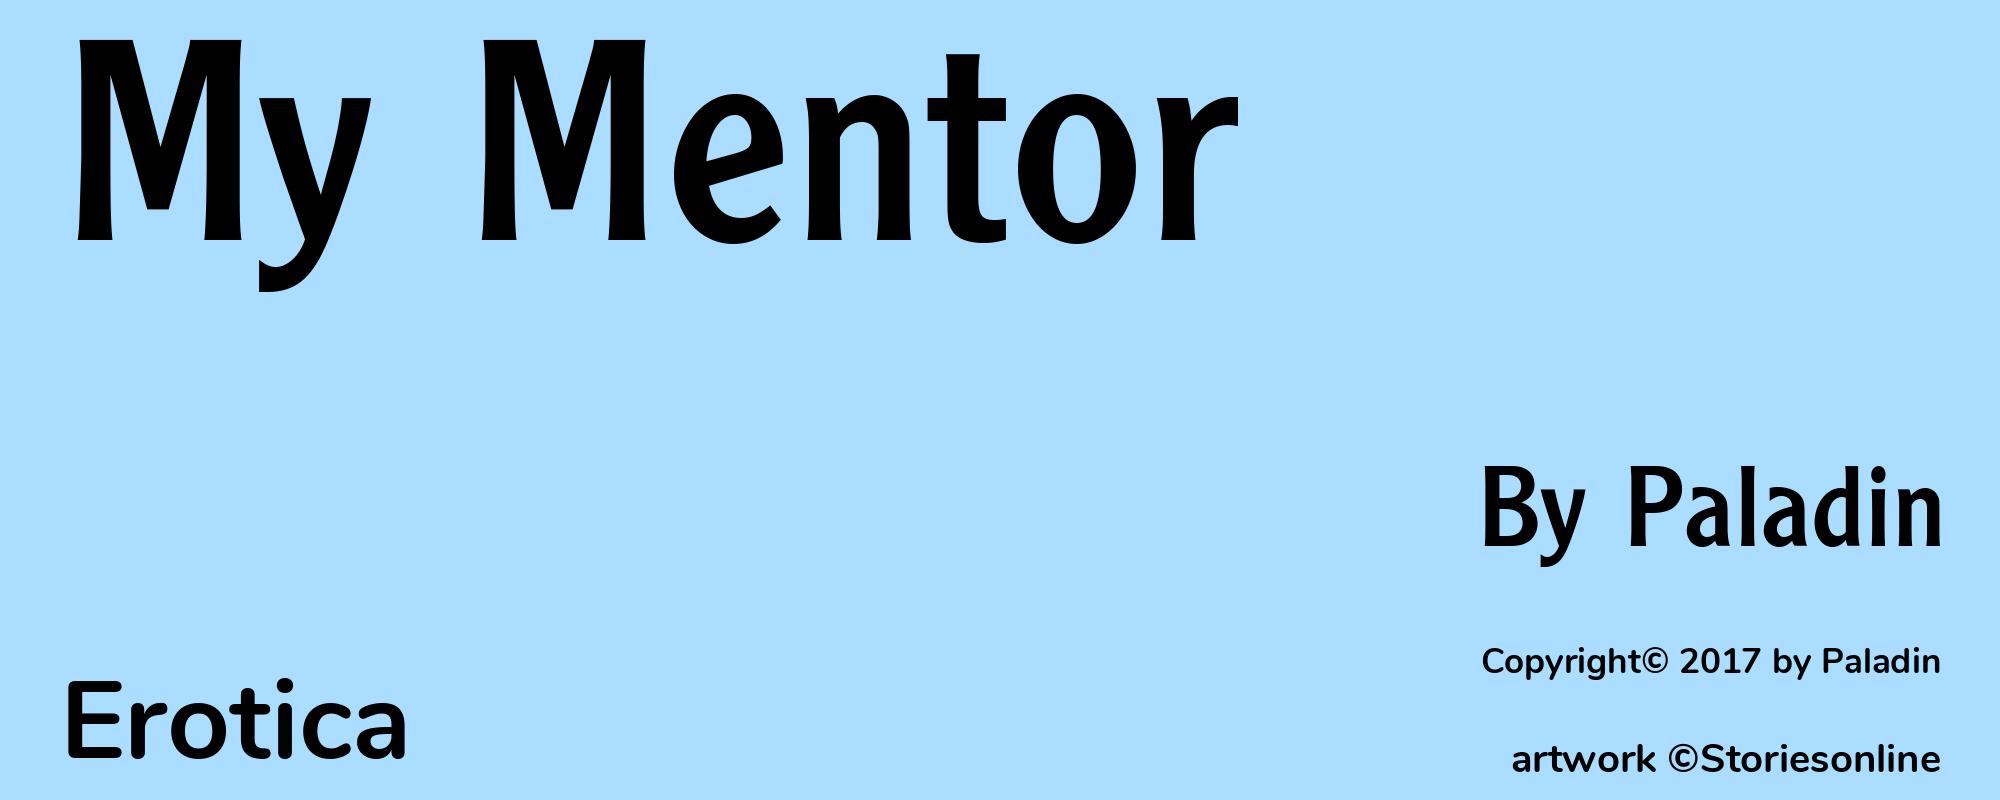 My Mentor - Cover